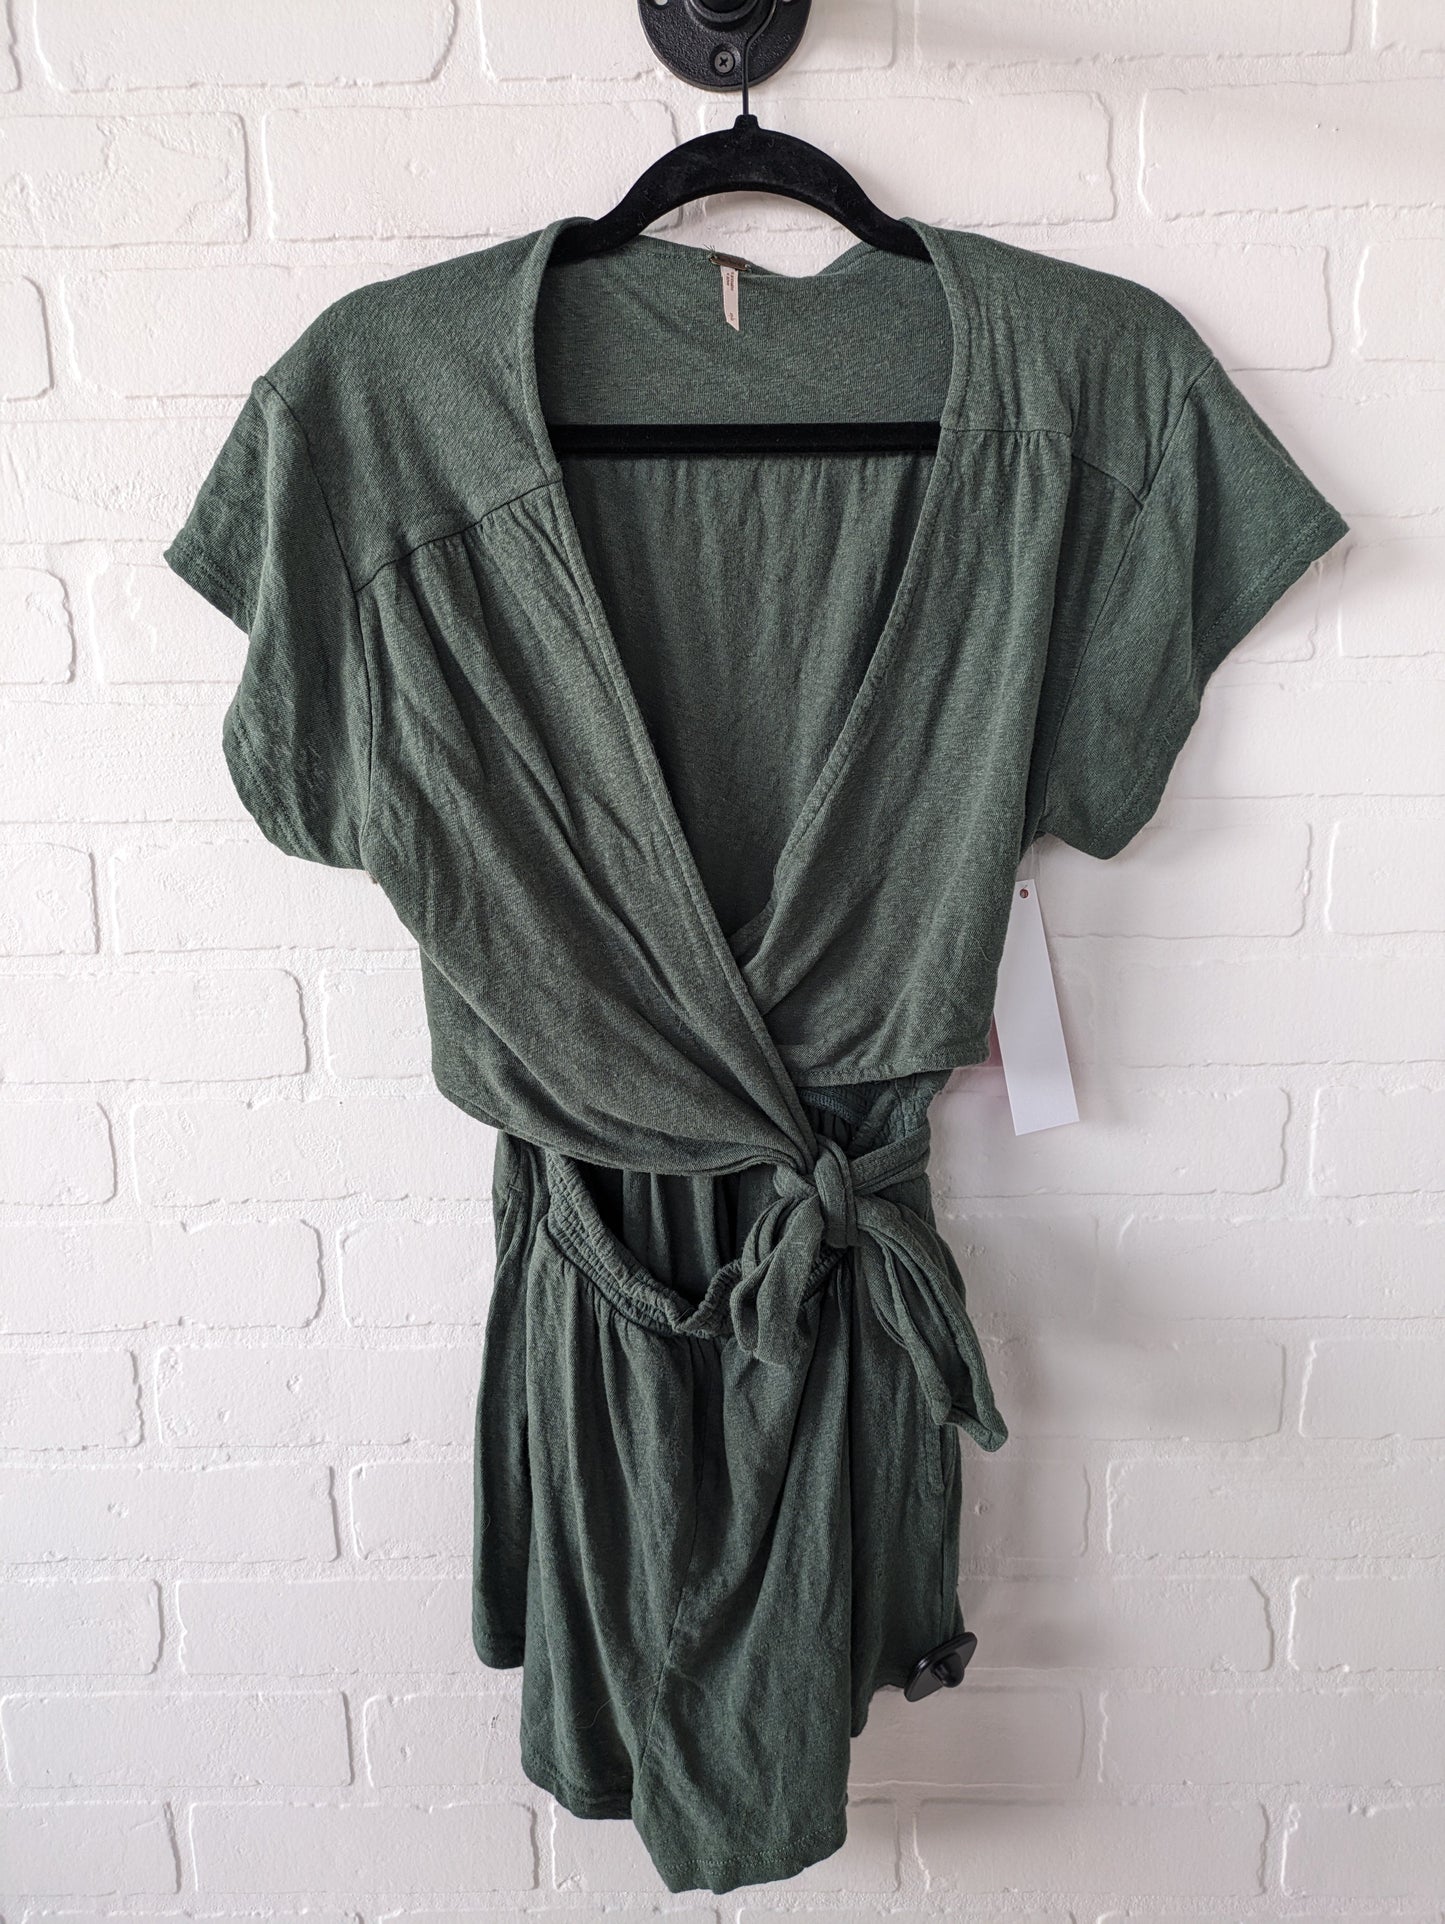 Romper By Free People  Size: S